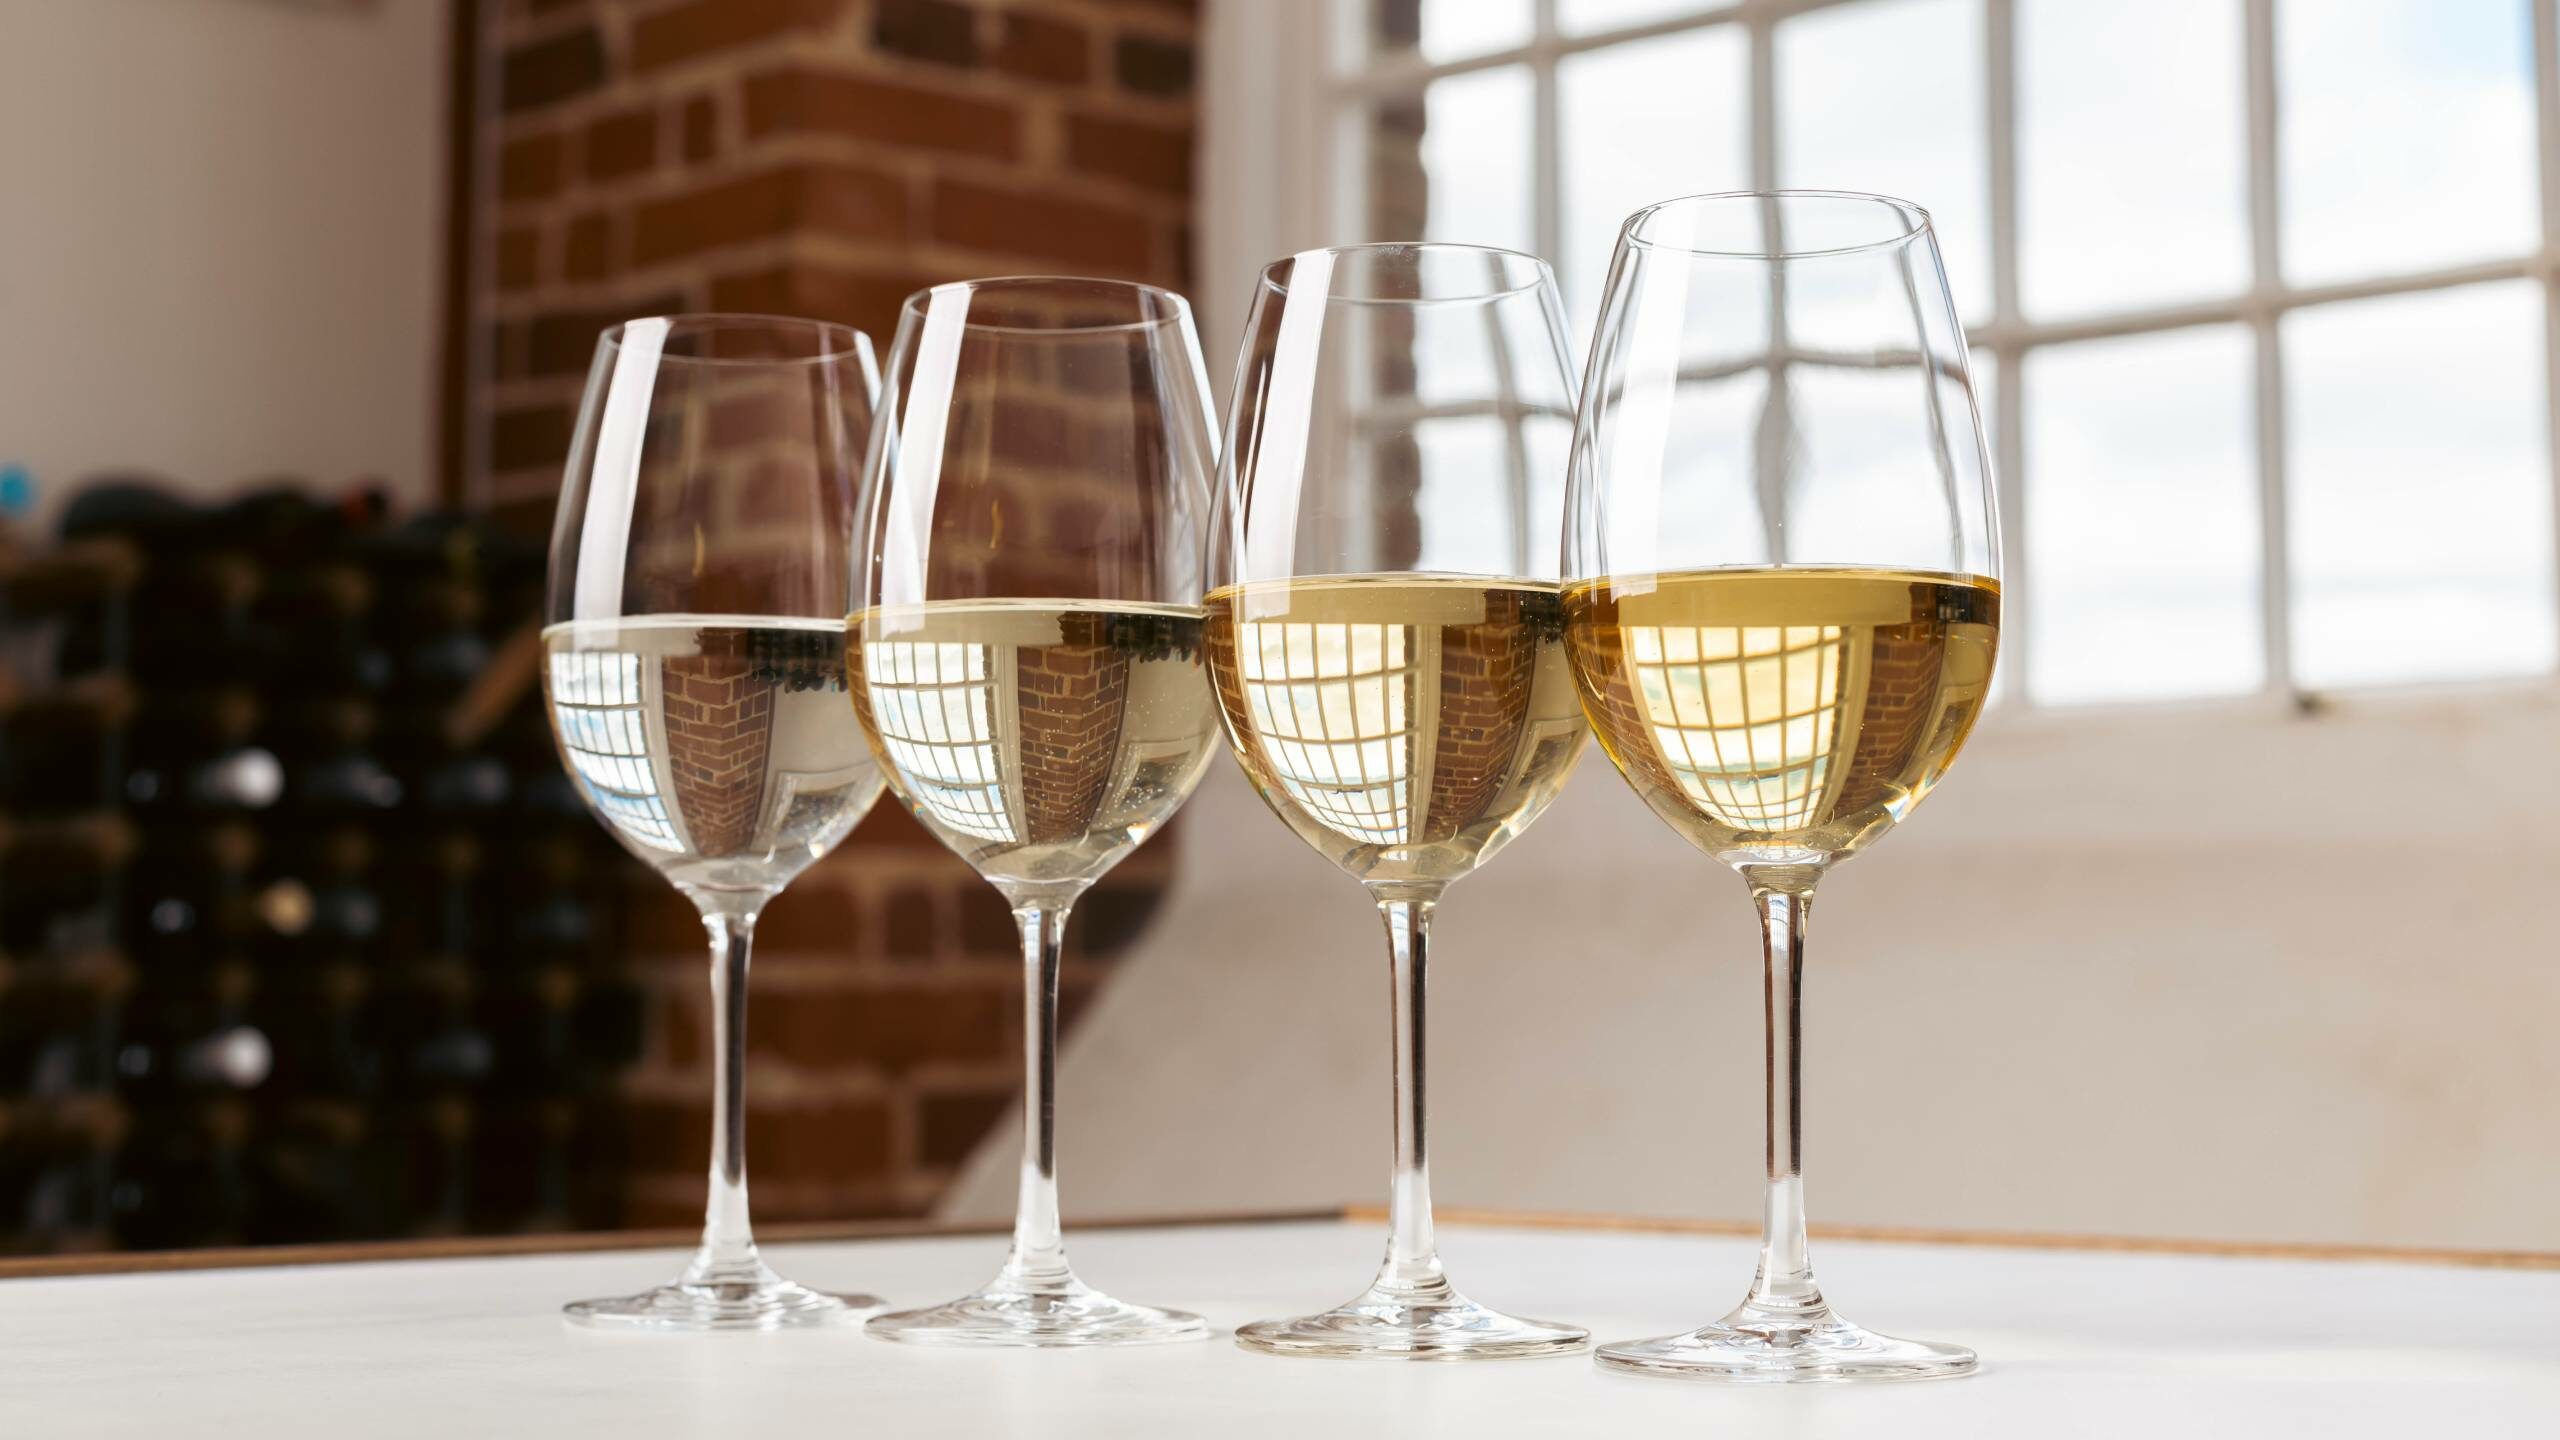 https://www.virginwines.co.uk/hub/wp-content/uploads/2022/08/Four-glasses-of-white-wine-lined-up-on-a-table-showing-different-types-of-white-wine-2560x1440.jpg